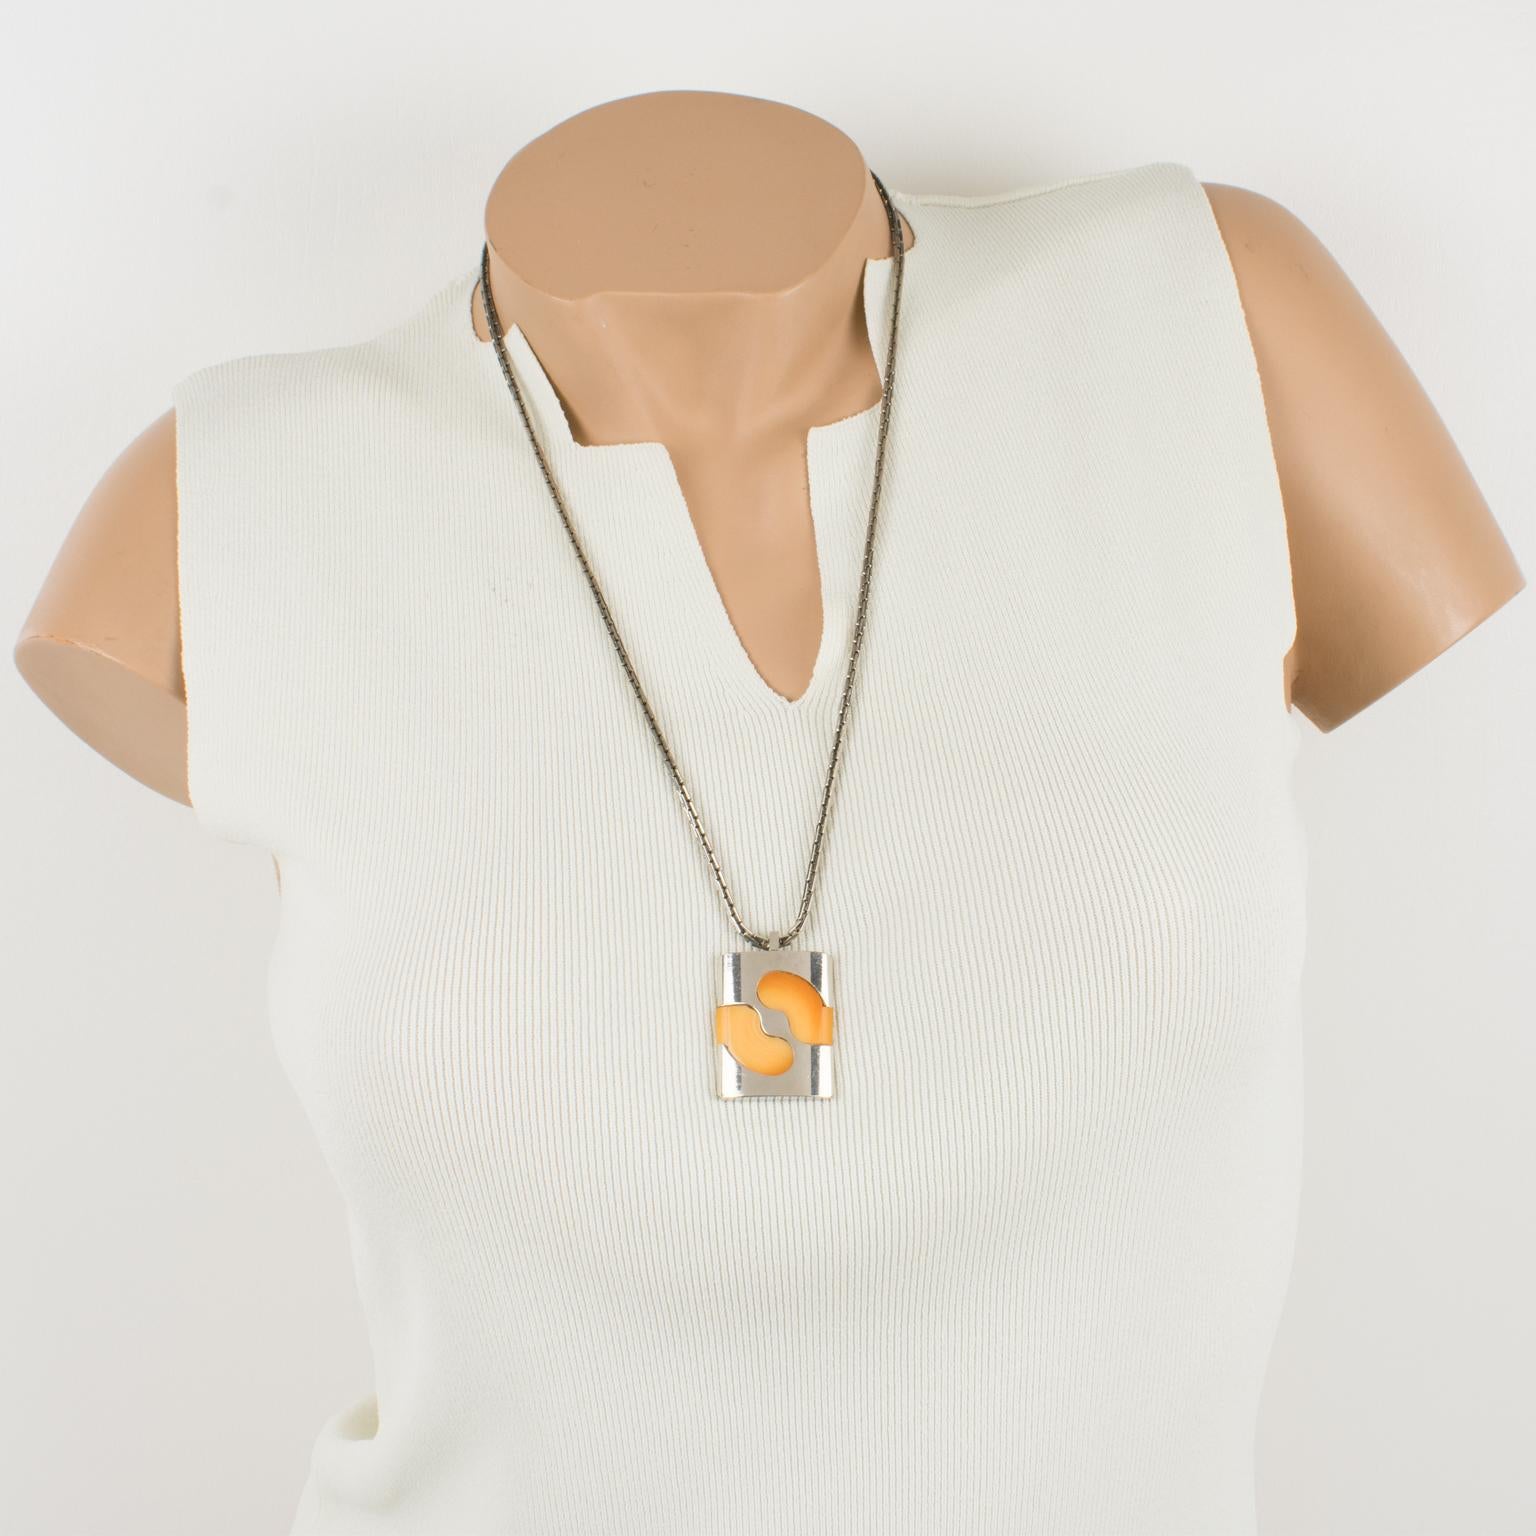 This lovely Pierre Cardin Paris modernist 1970s necklace features an extra-long silverplate metal worked chain with a Mod pendant. The pendant has a geometric design with a silvered metal framing ornate with yellow marigold resin inserts. The